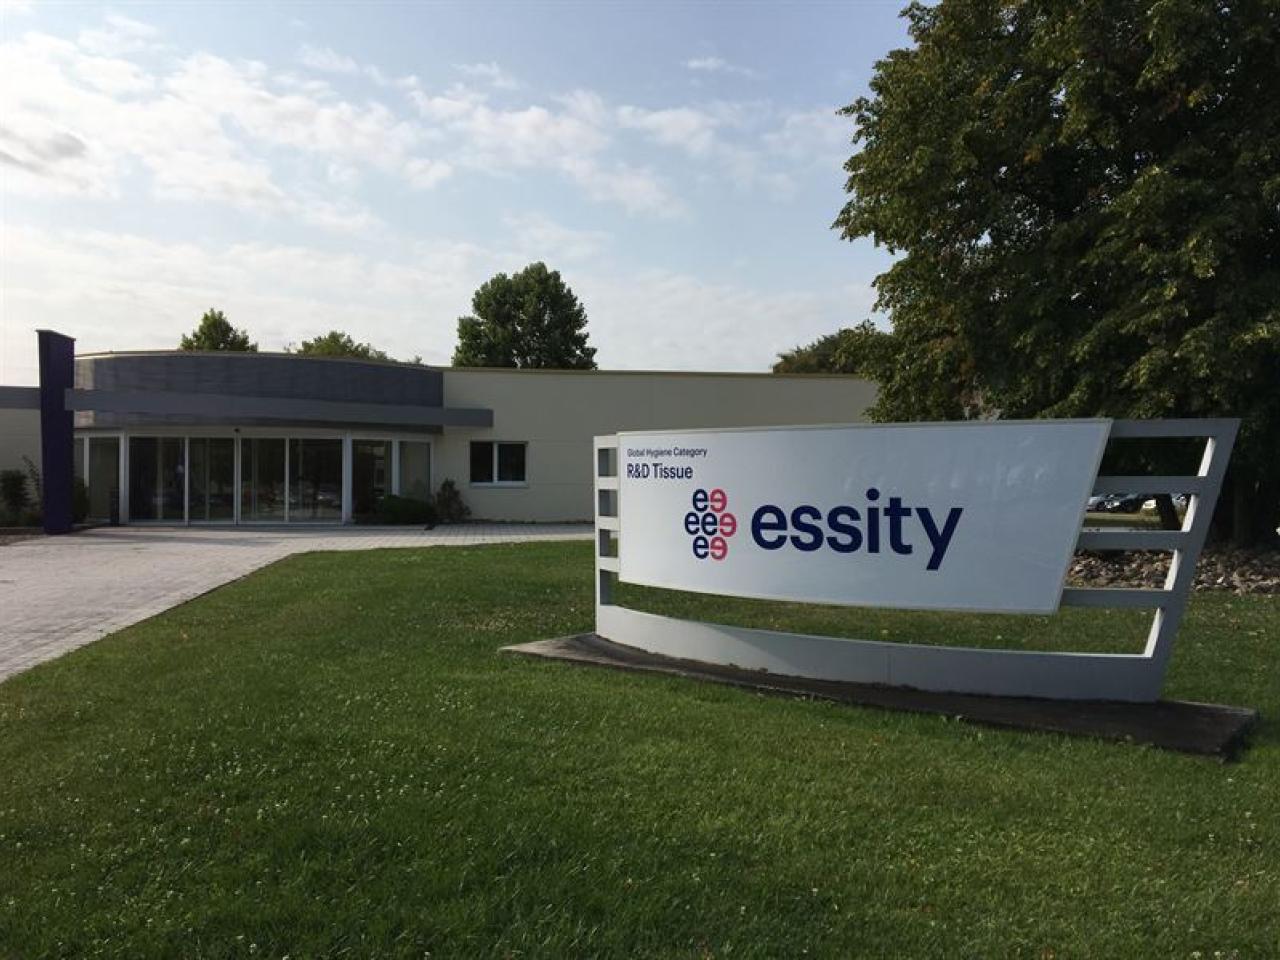 New Essity Research and Development center in Alsace, France.